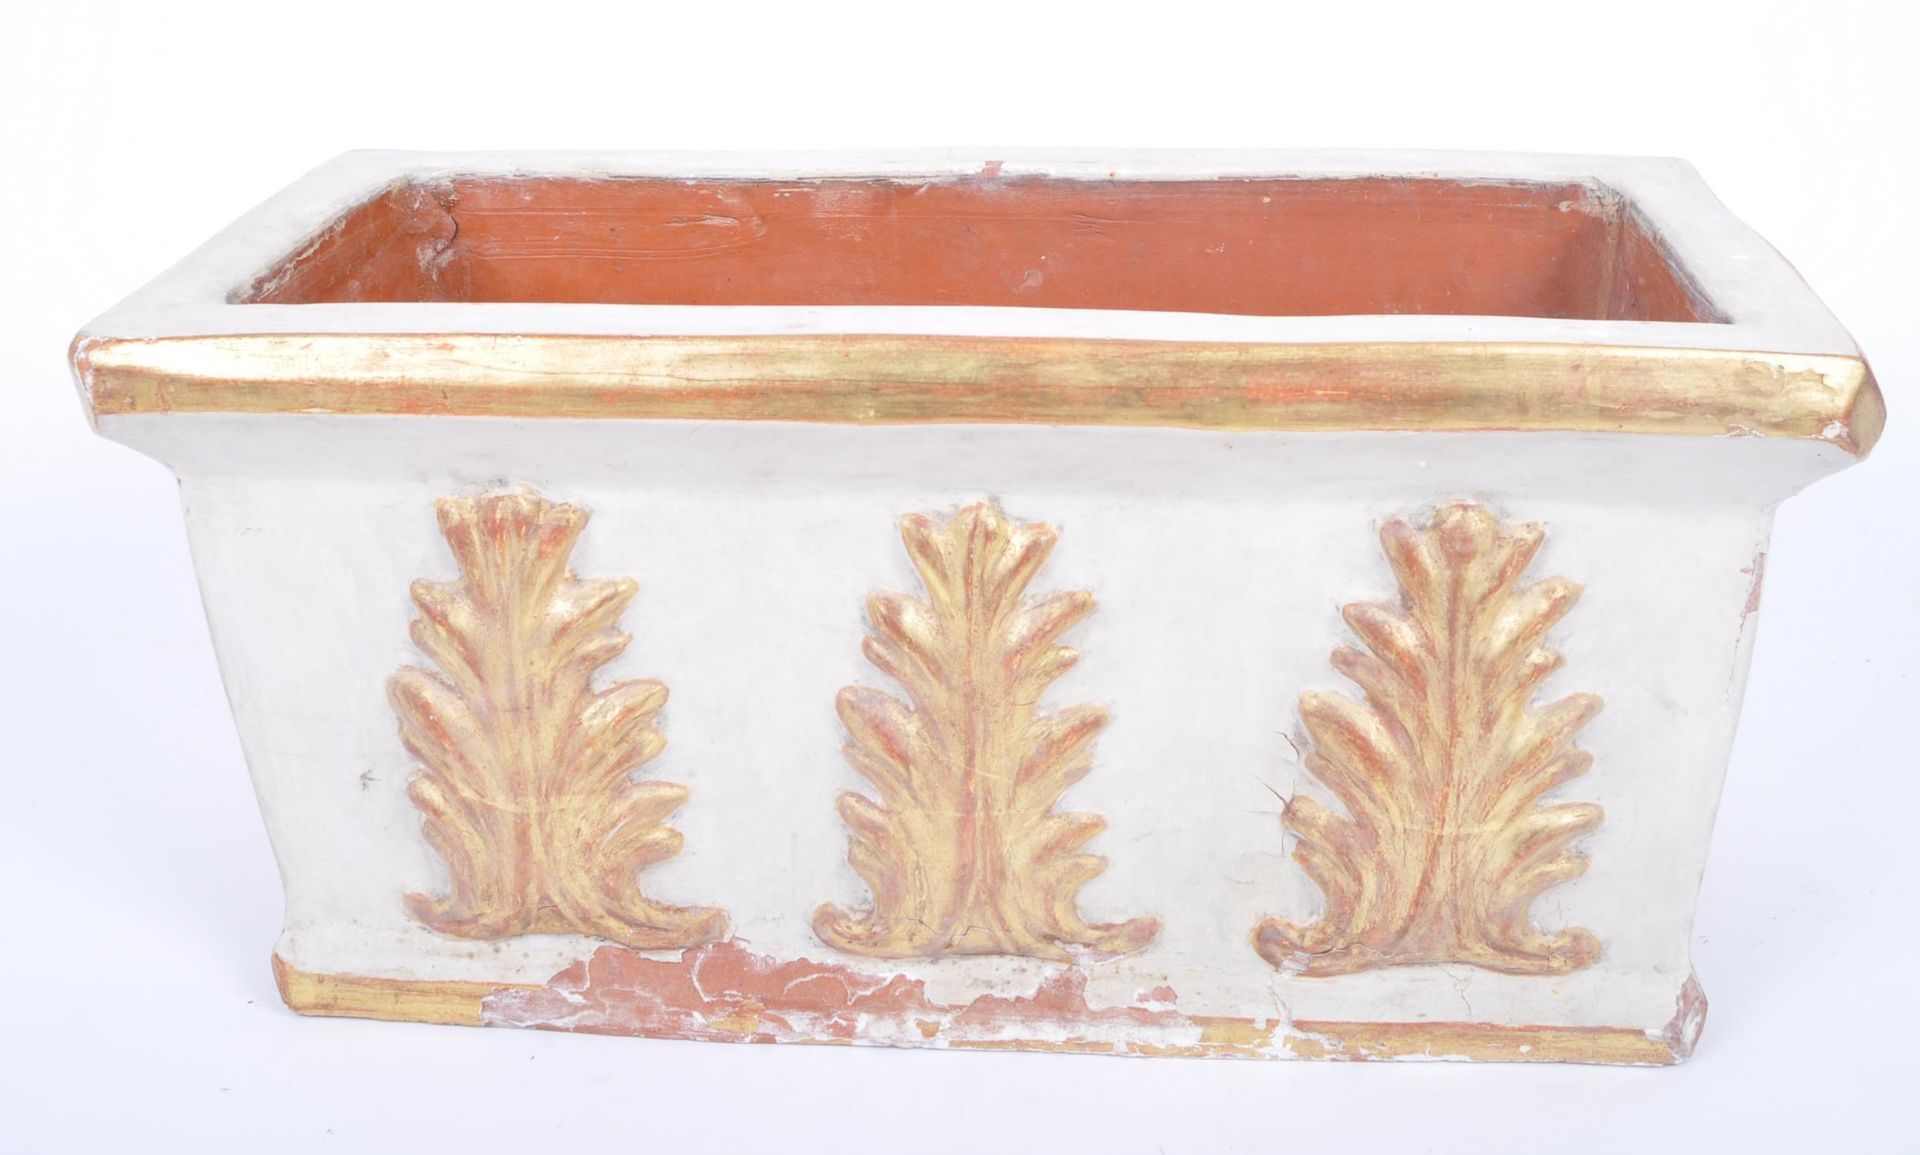 MIDCENTURY NEOCLASSICAL GILDED TERRACOTTA PLANTER - Image 3 of 6